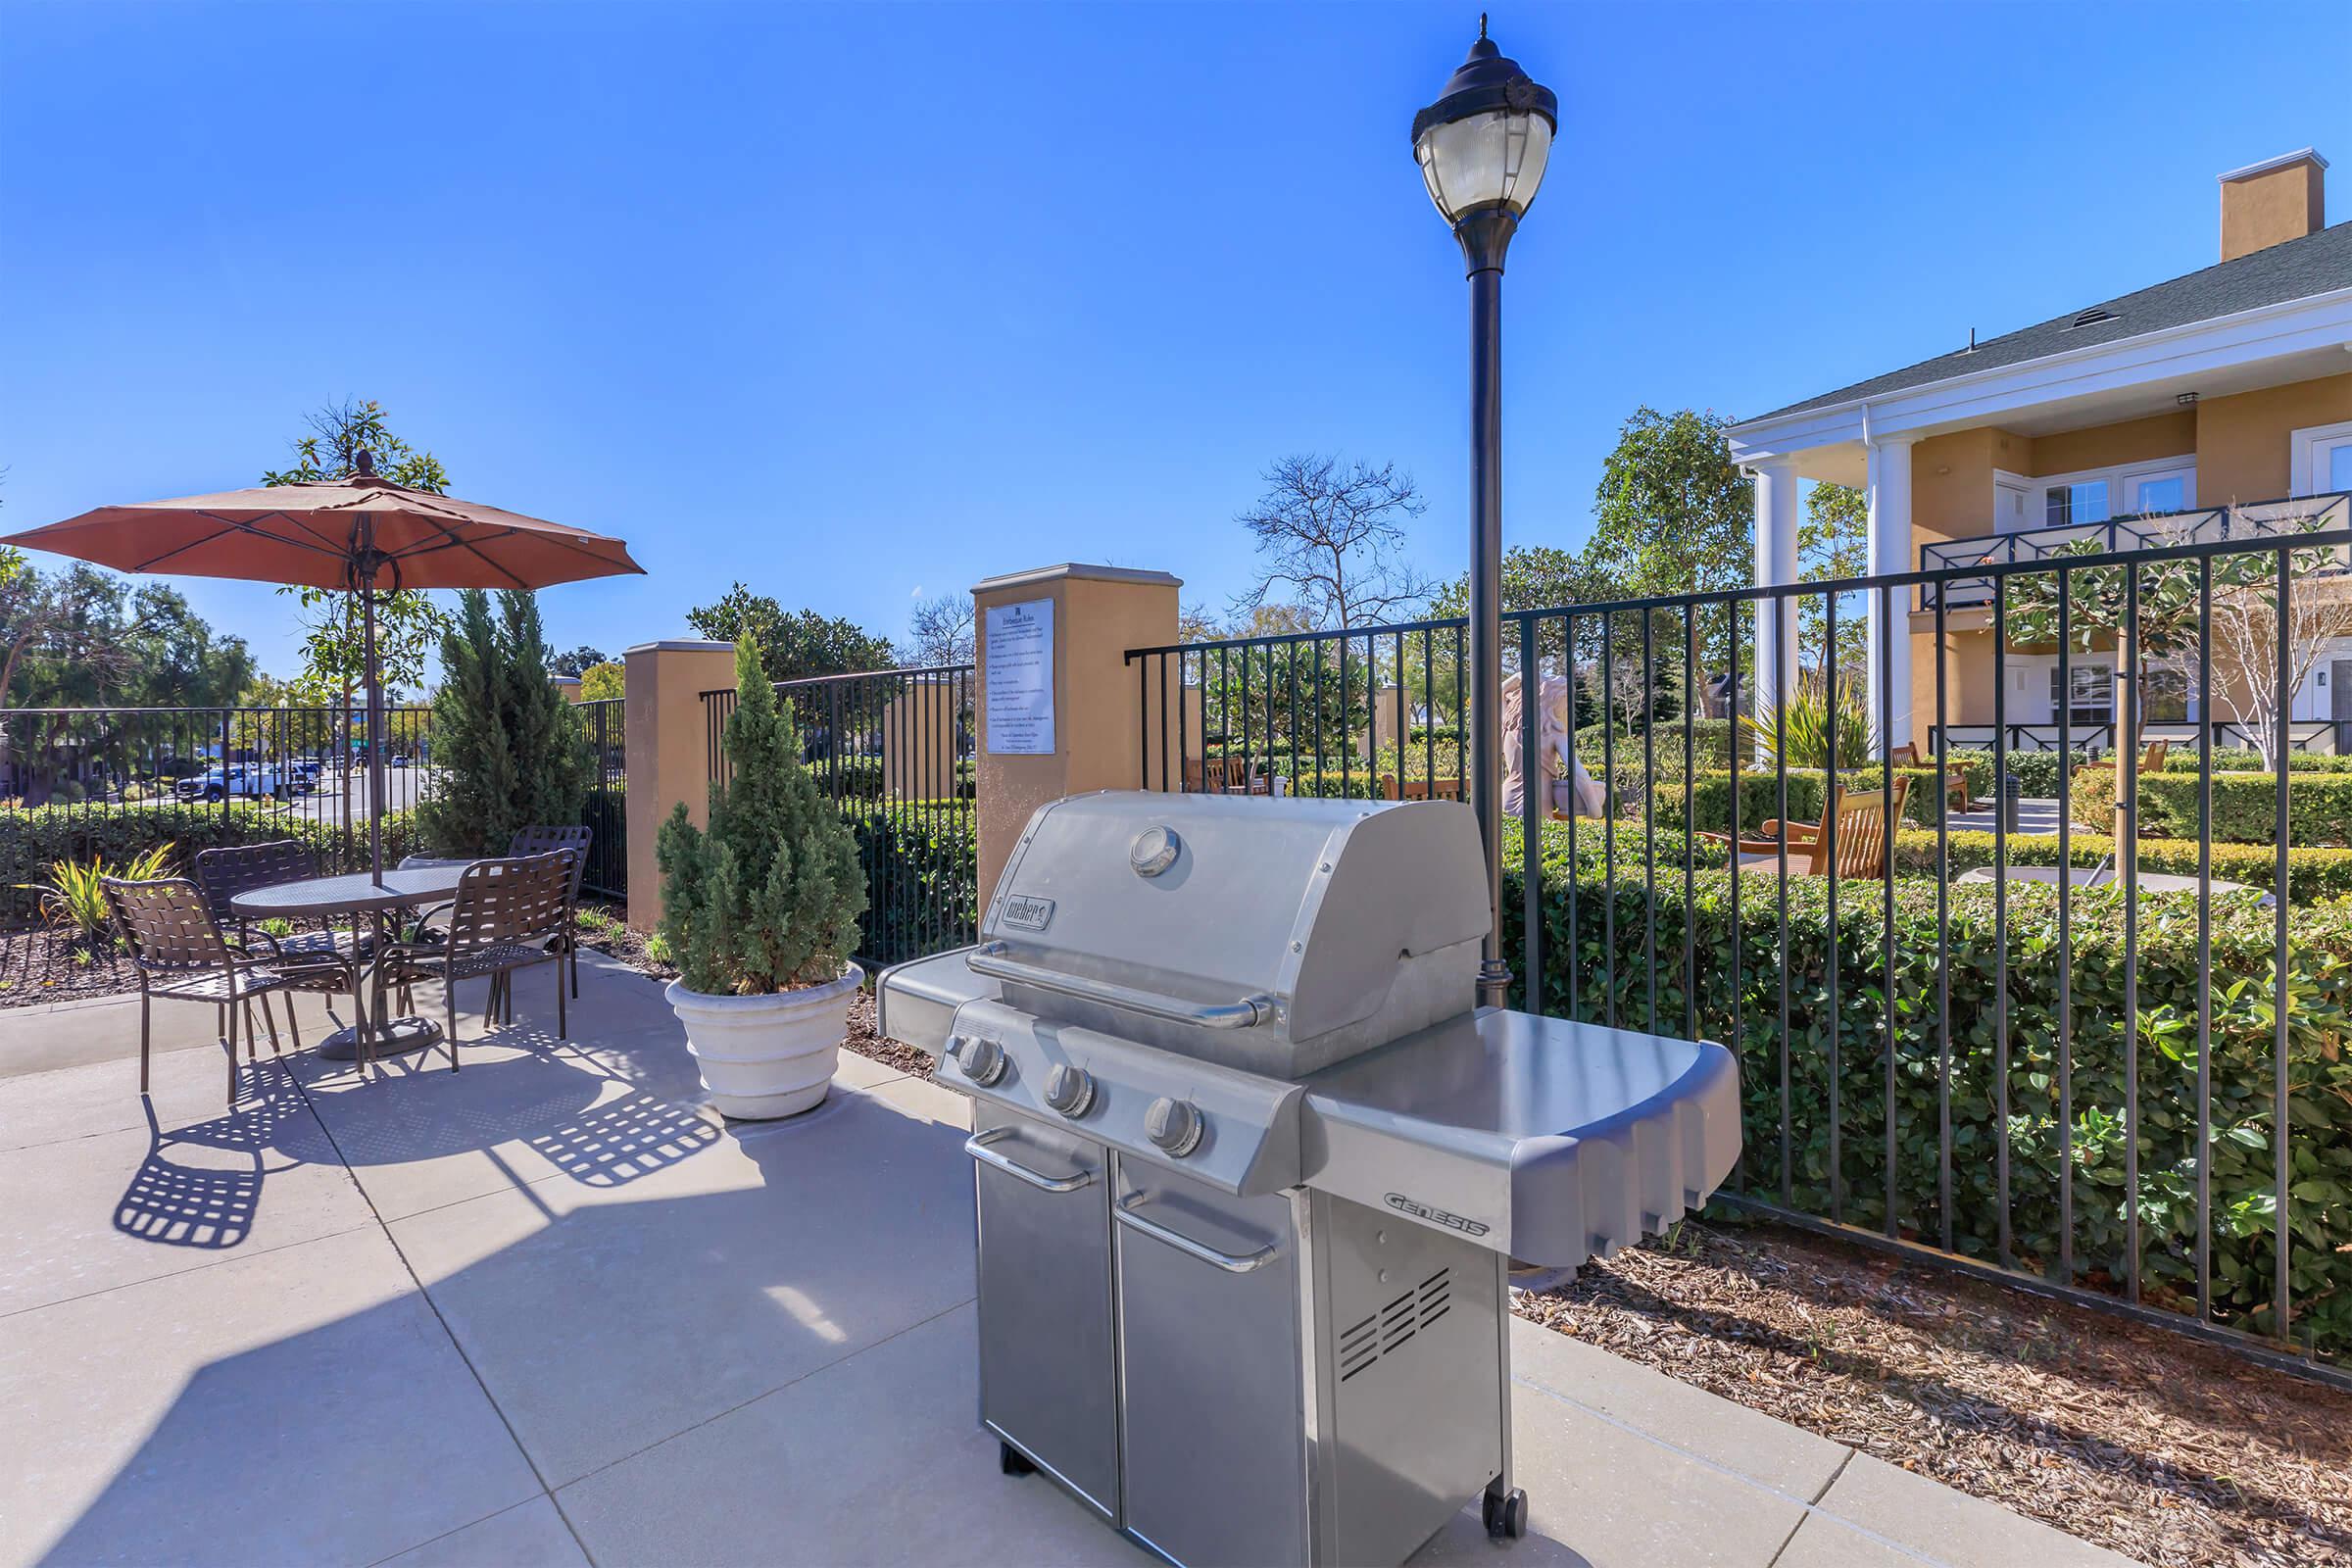 Stainless steel barbecue with a table and chairs